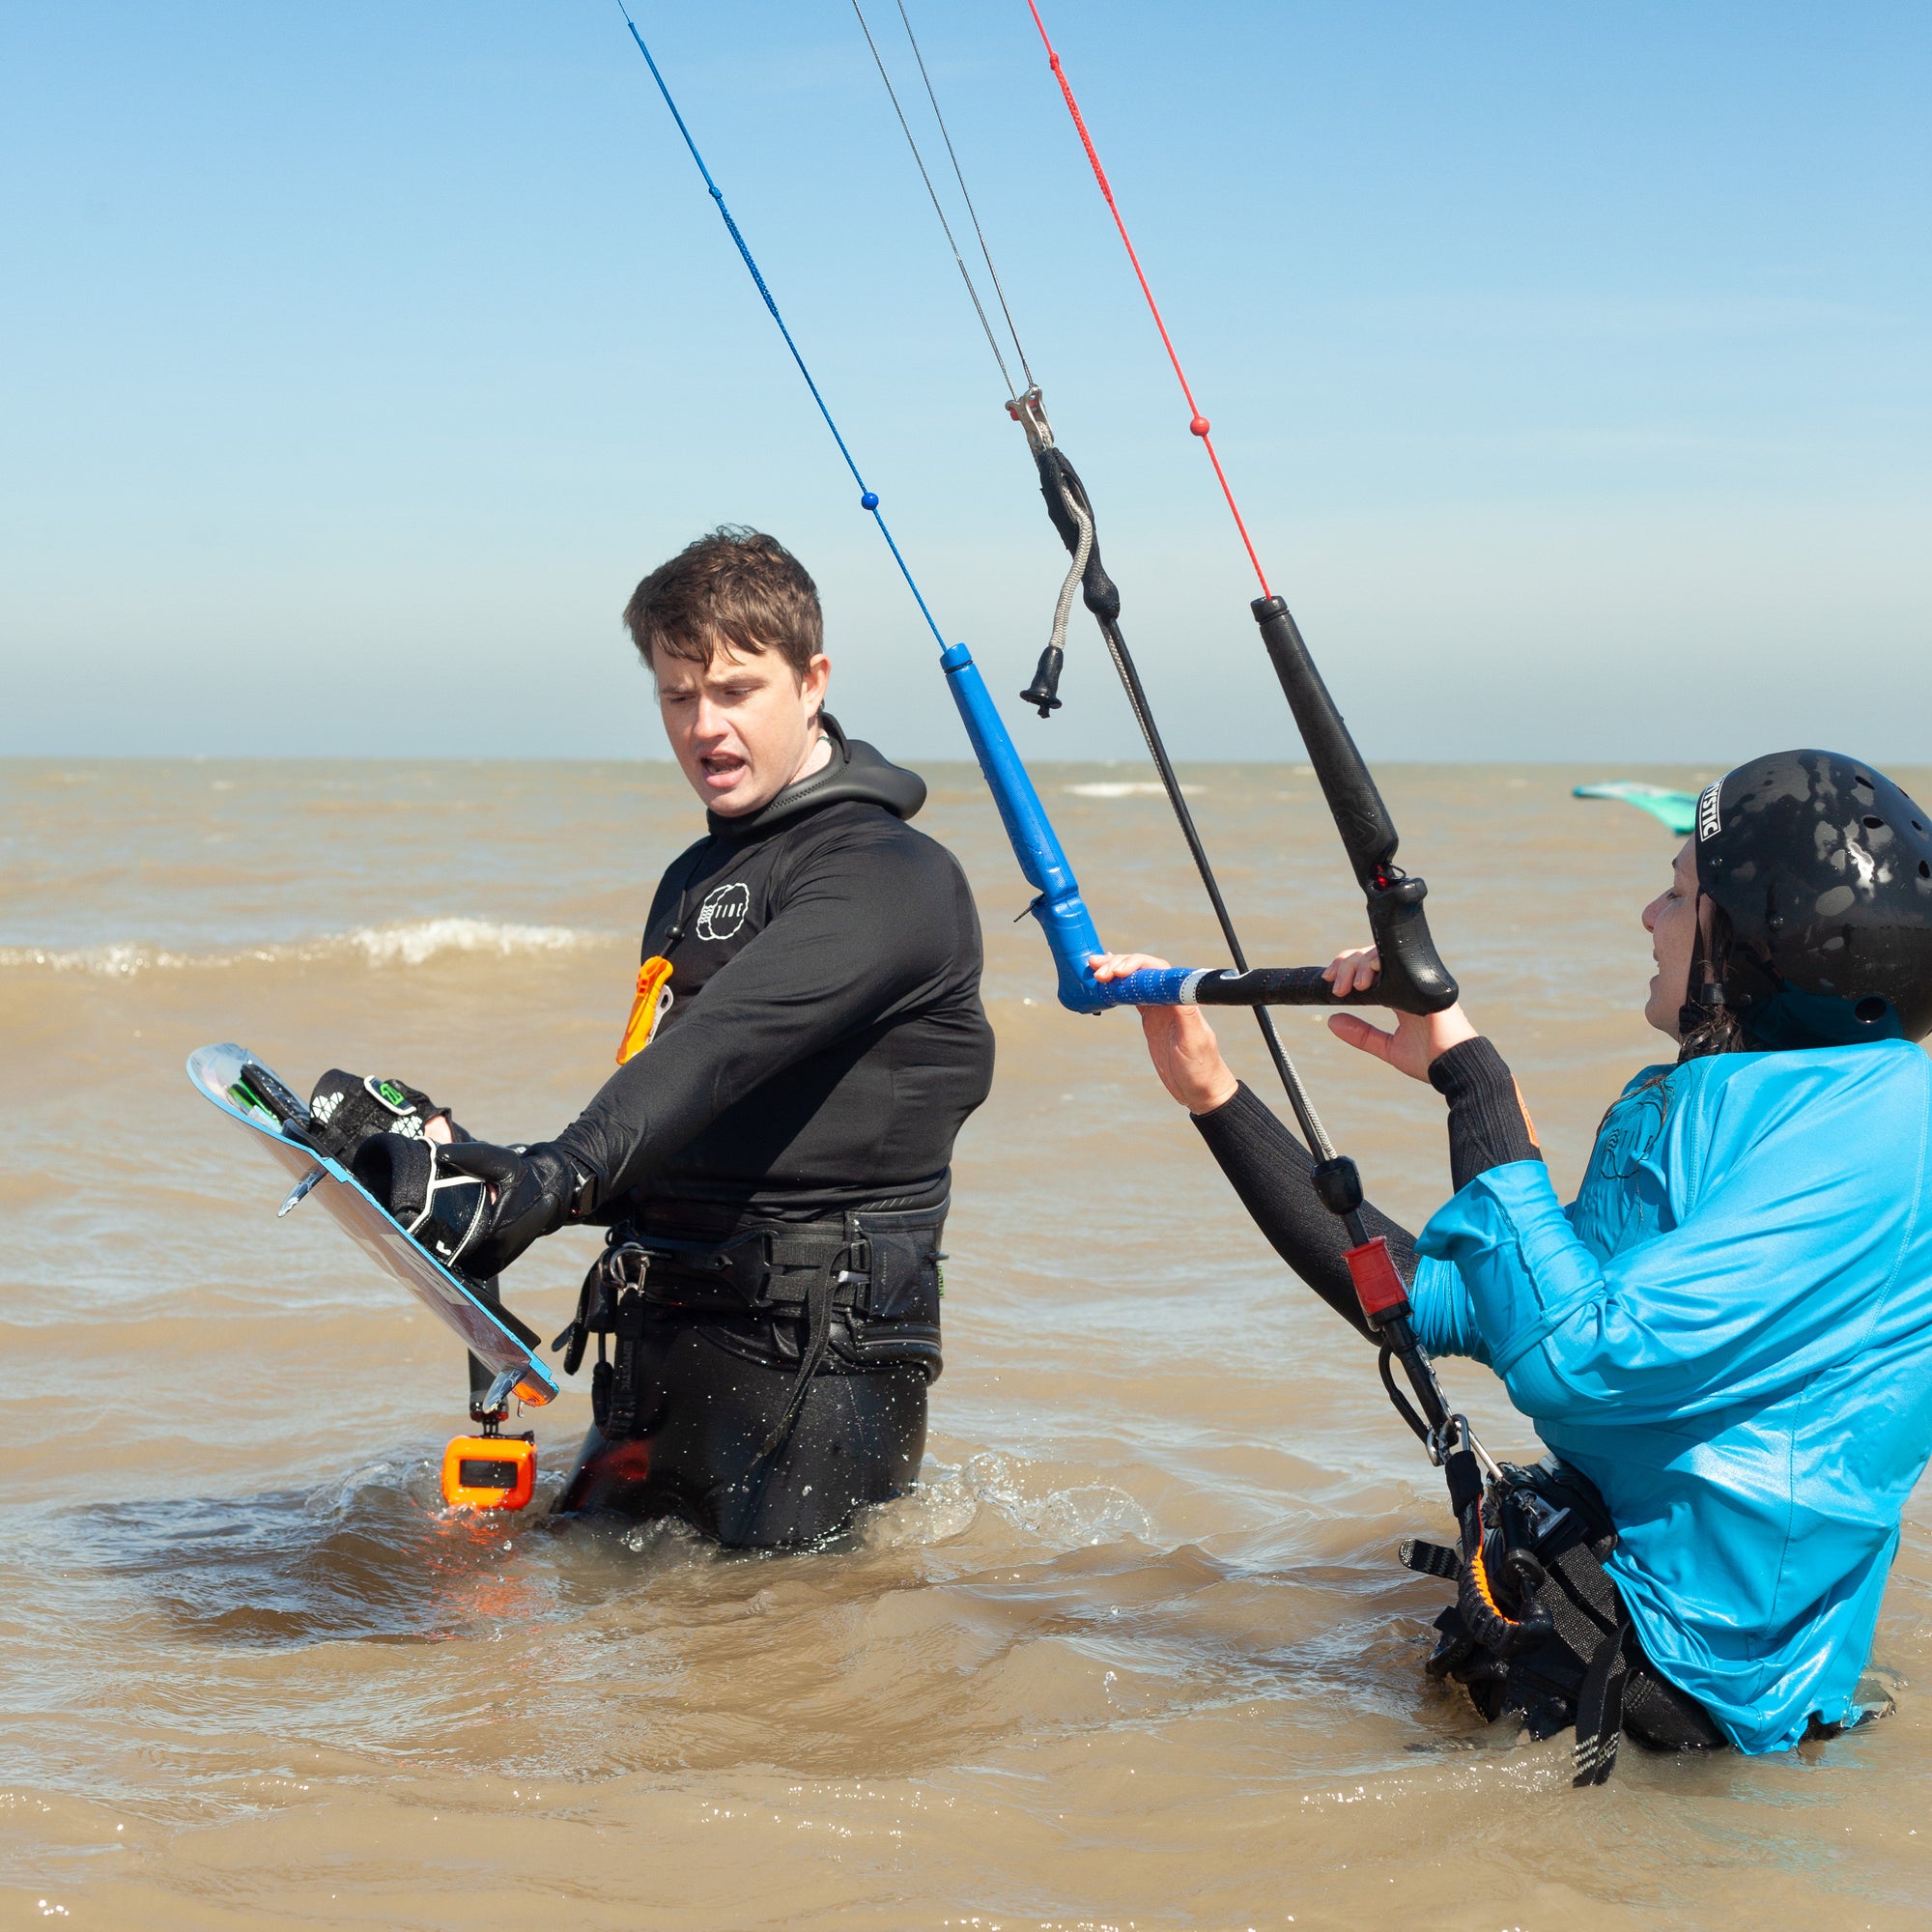 Tide Watersports private kitesurfing lesson in progress in Margate, Kent with the instructor showing the student a valuable lesson on how to hold the board when putting it on your feet in the water whilst holding a kite in the air.